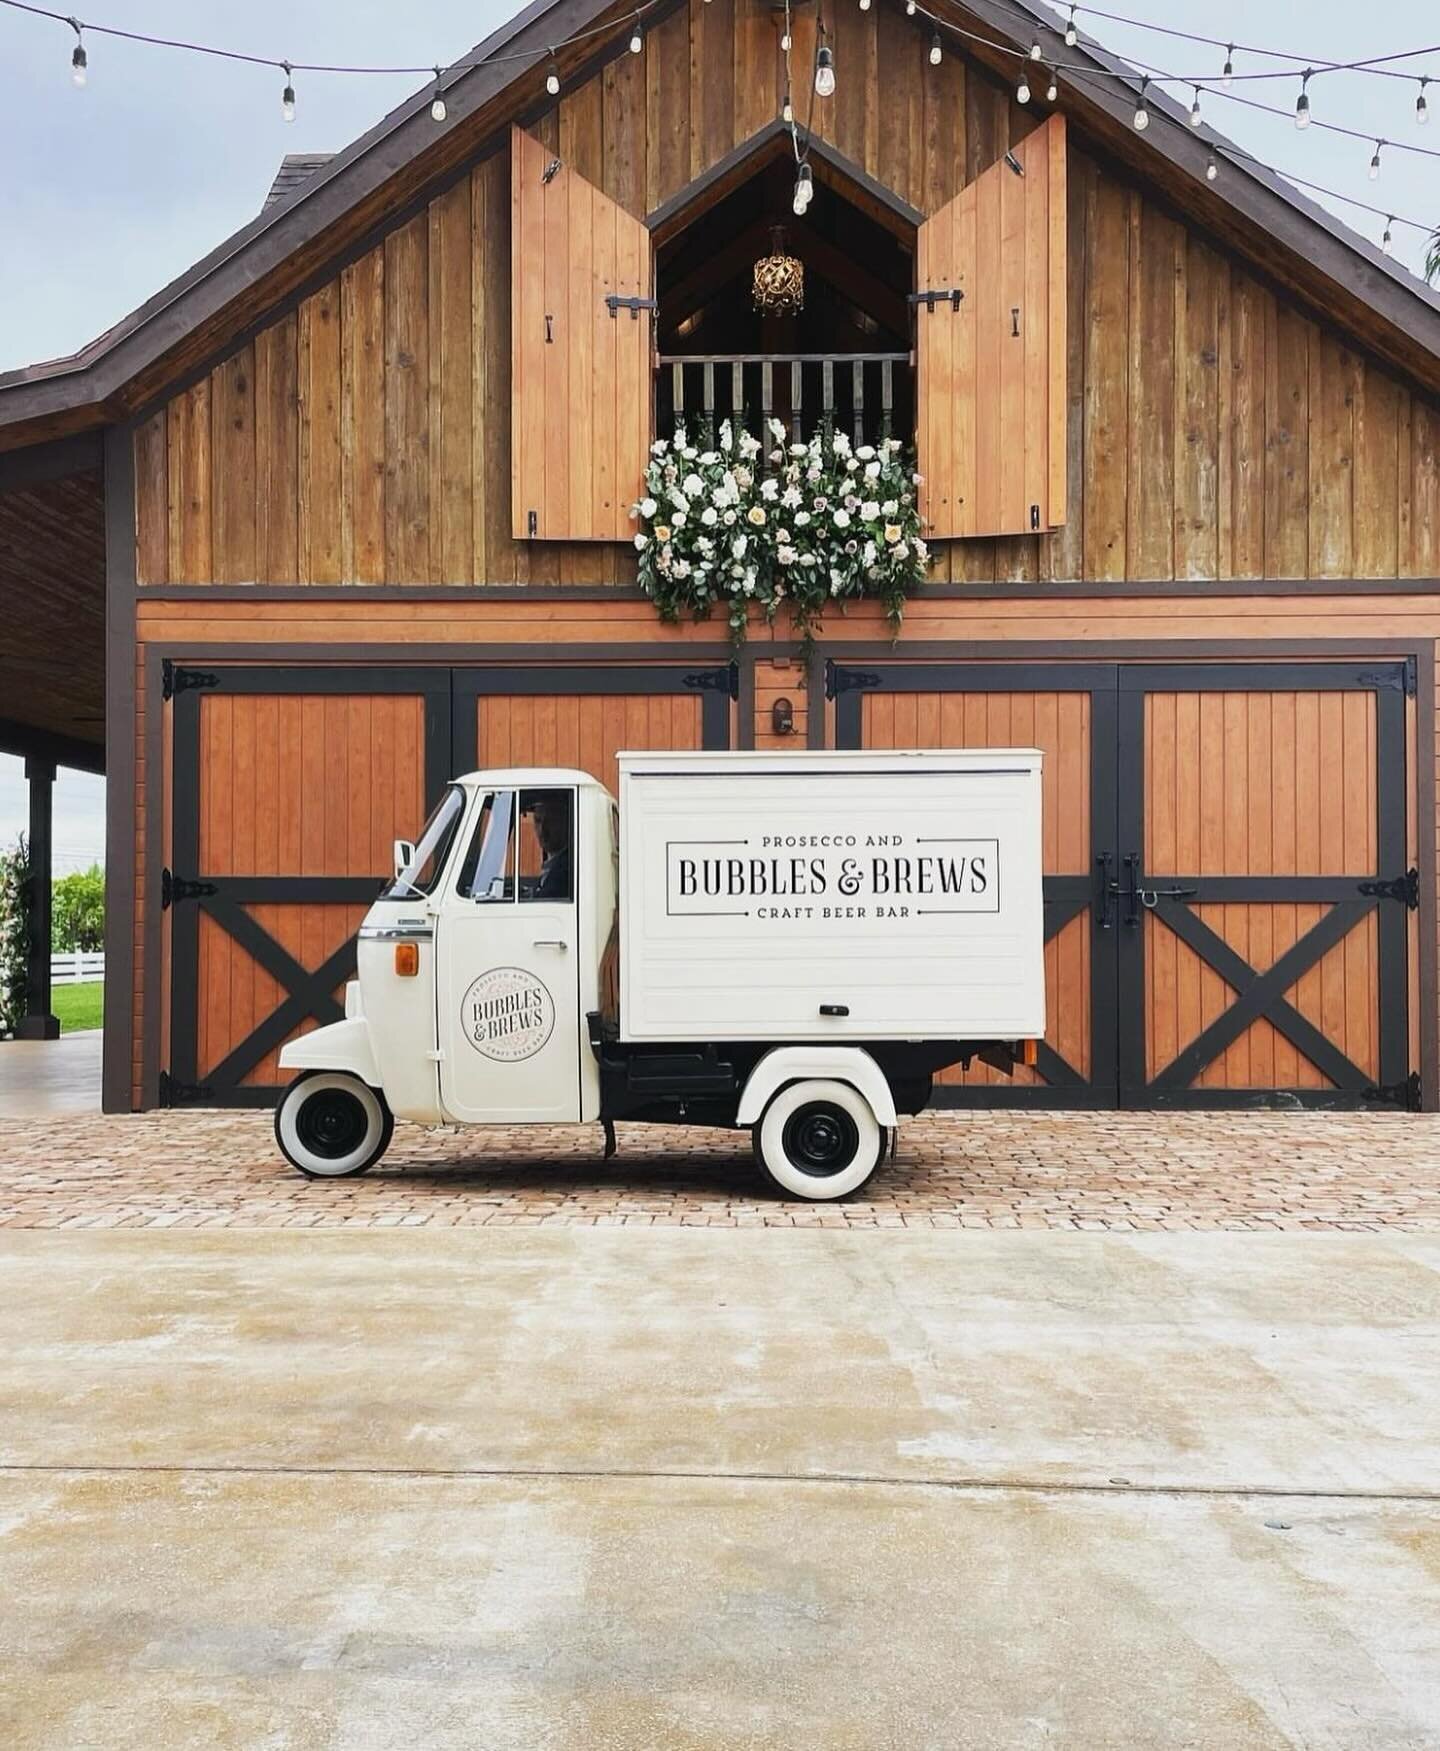 🎉 Let us help you celebrate your special day! Our adorable vintage Piaggo is ready to roll up and serve your favorite drinks all night long 🍹🍸 Whether it&rsquo;s a birthday, wedding, or any other special occasion, we&rsquo;ve got you covered! Sit 